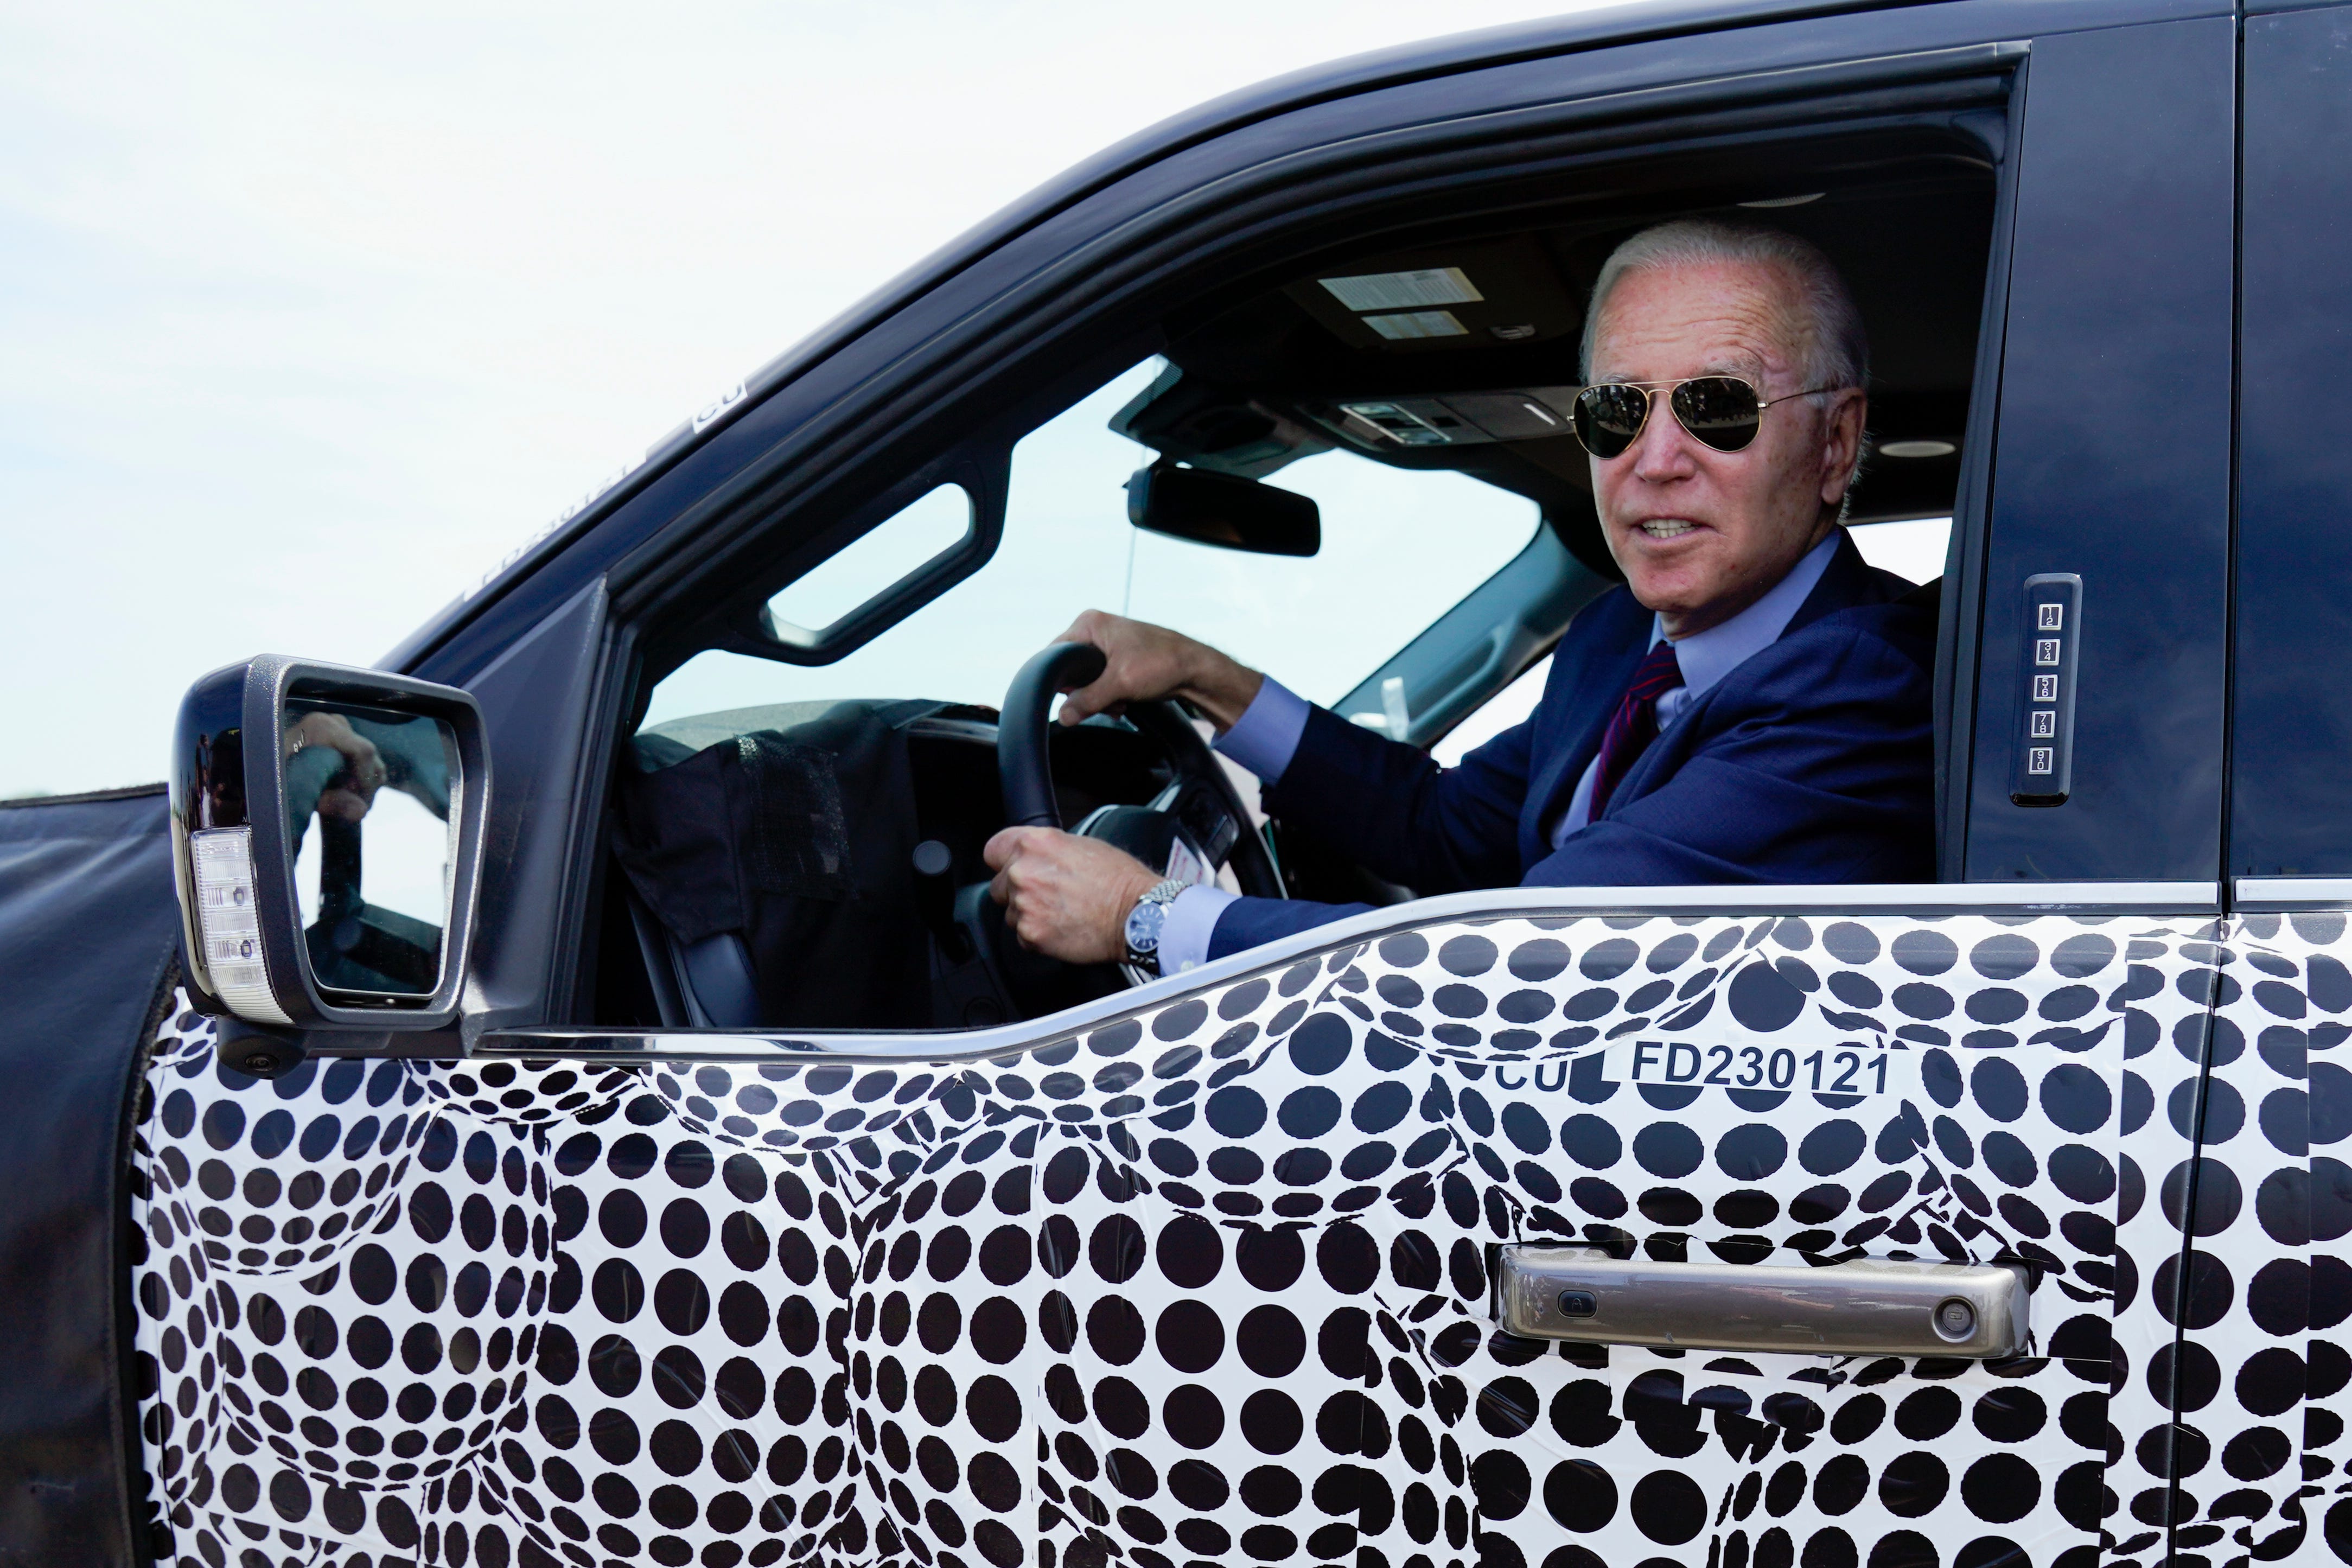 President Joe Biden stops to talk to the media as he drives a Ford F-150 Lightning truck at Ford Dearborn Development Center, Tuesday, May 18, 2021, in Dearborn.